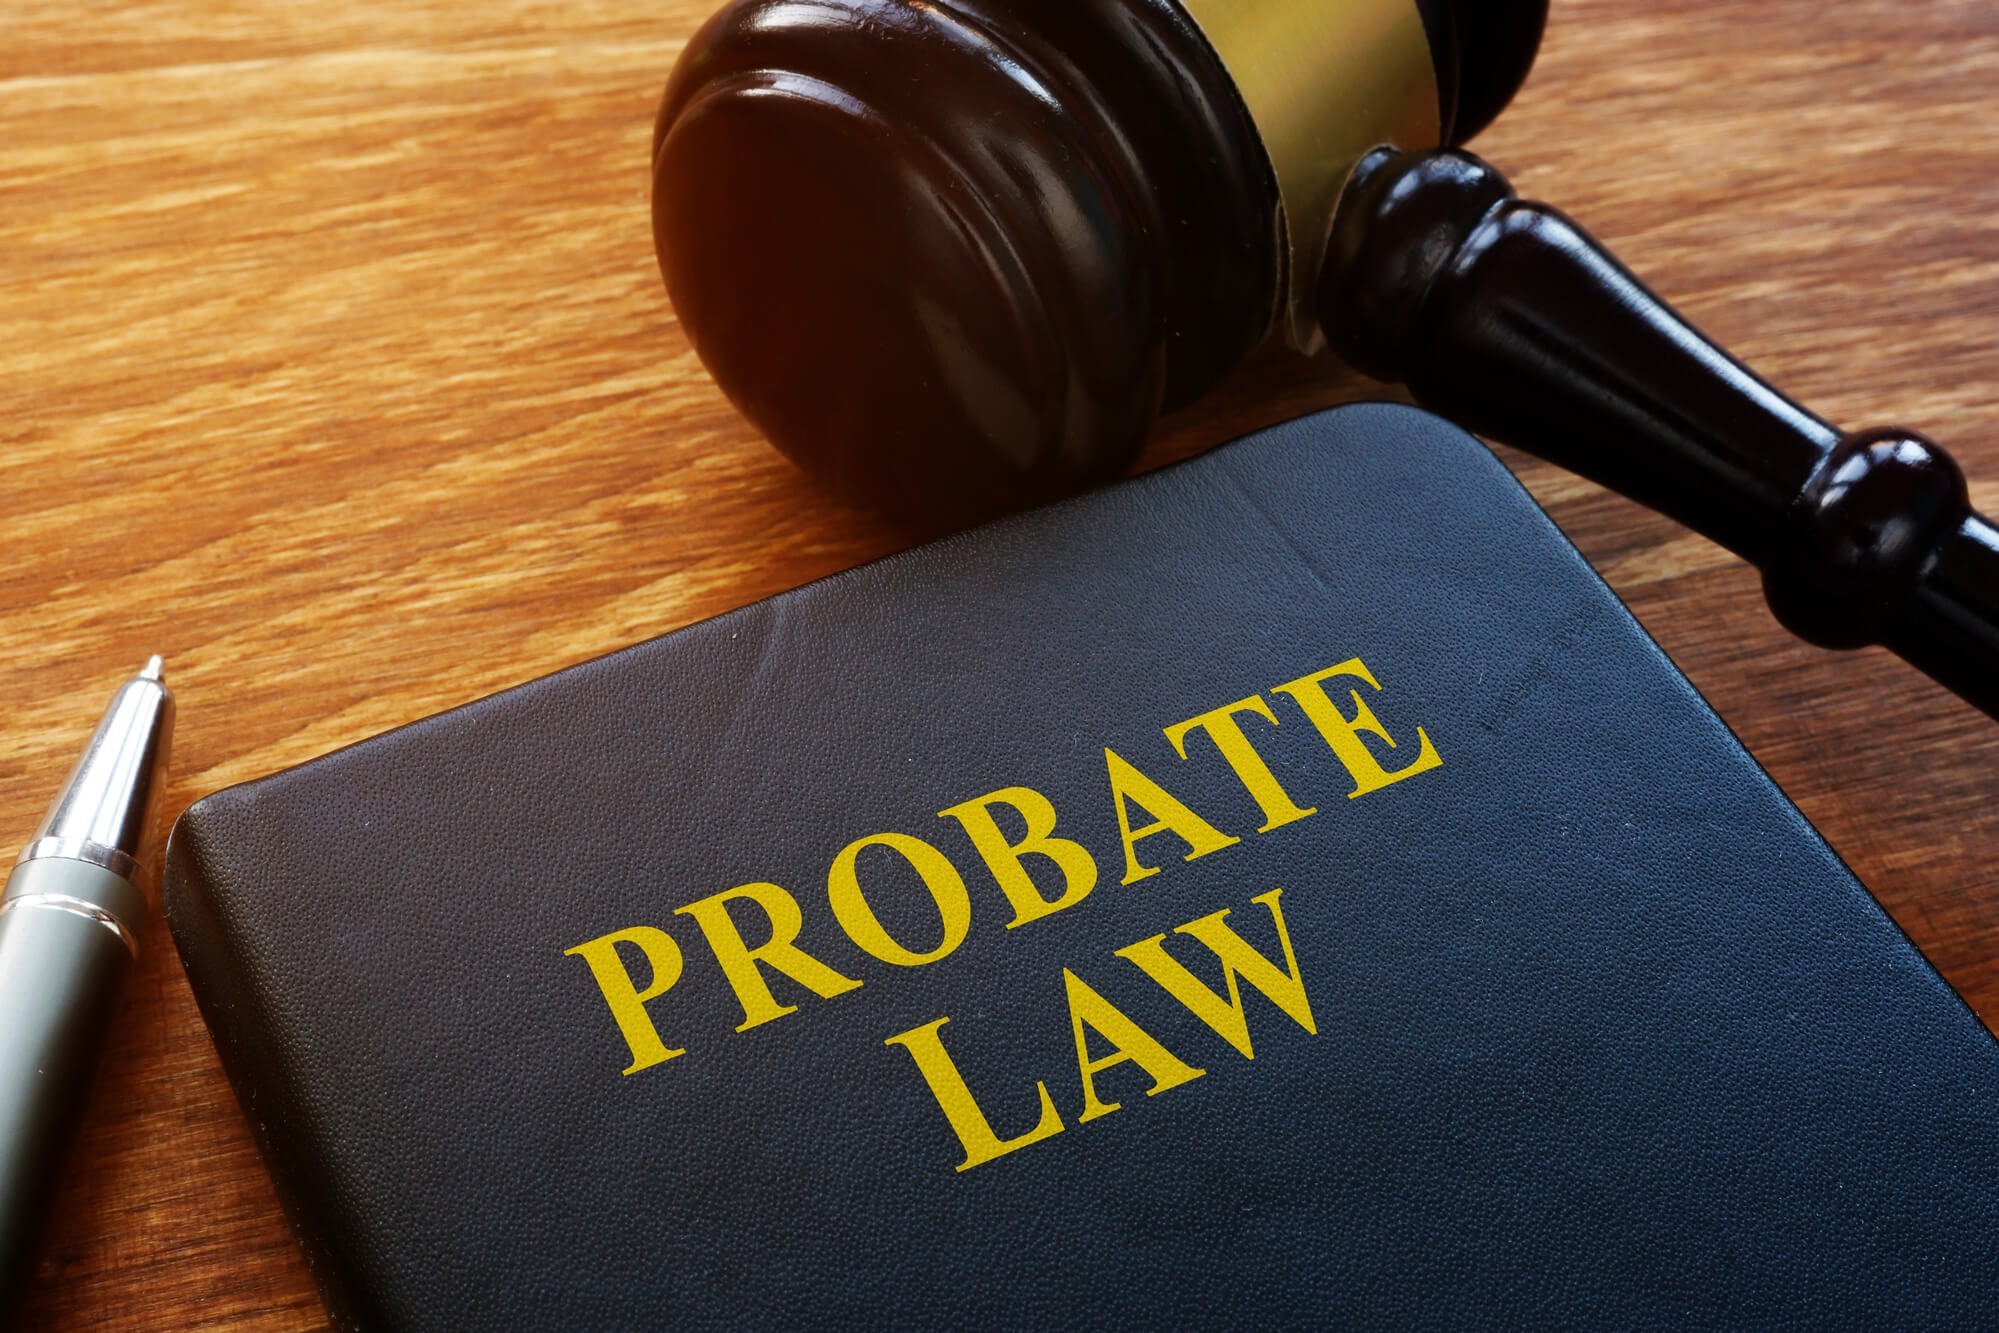 Probate law book with a gavel by its side